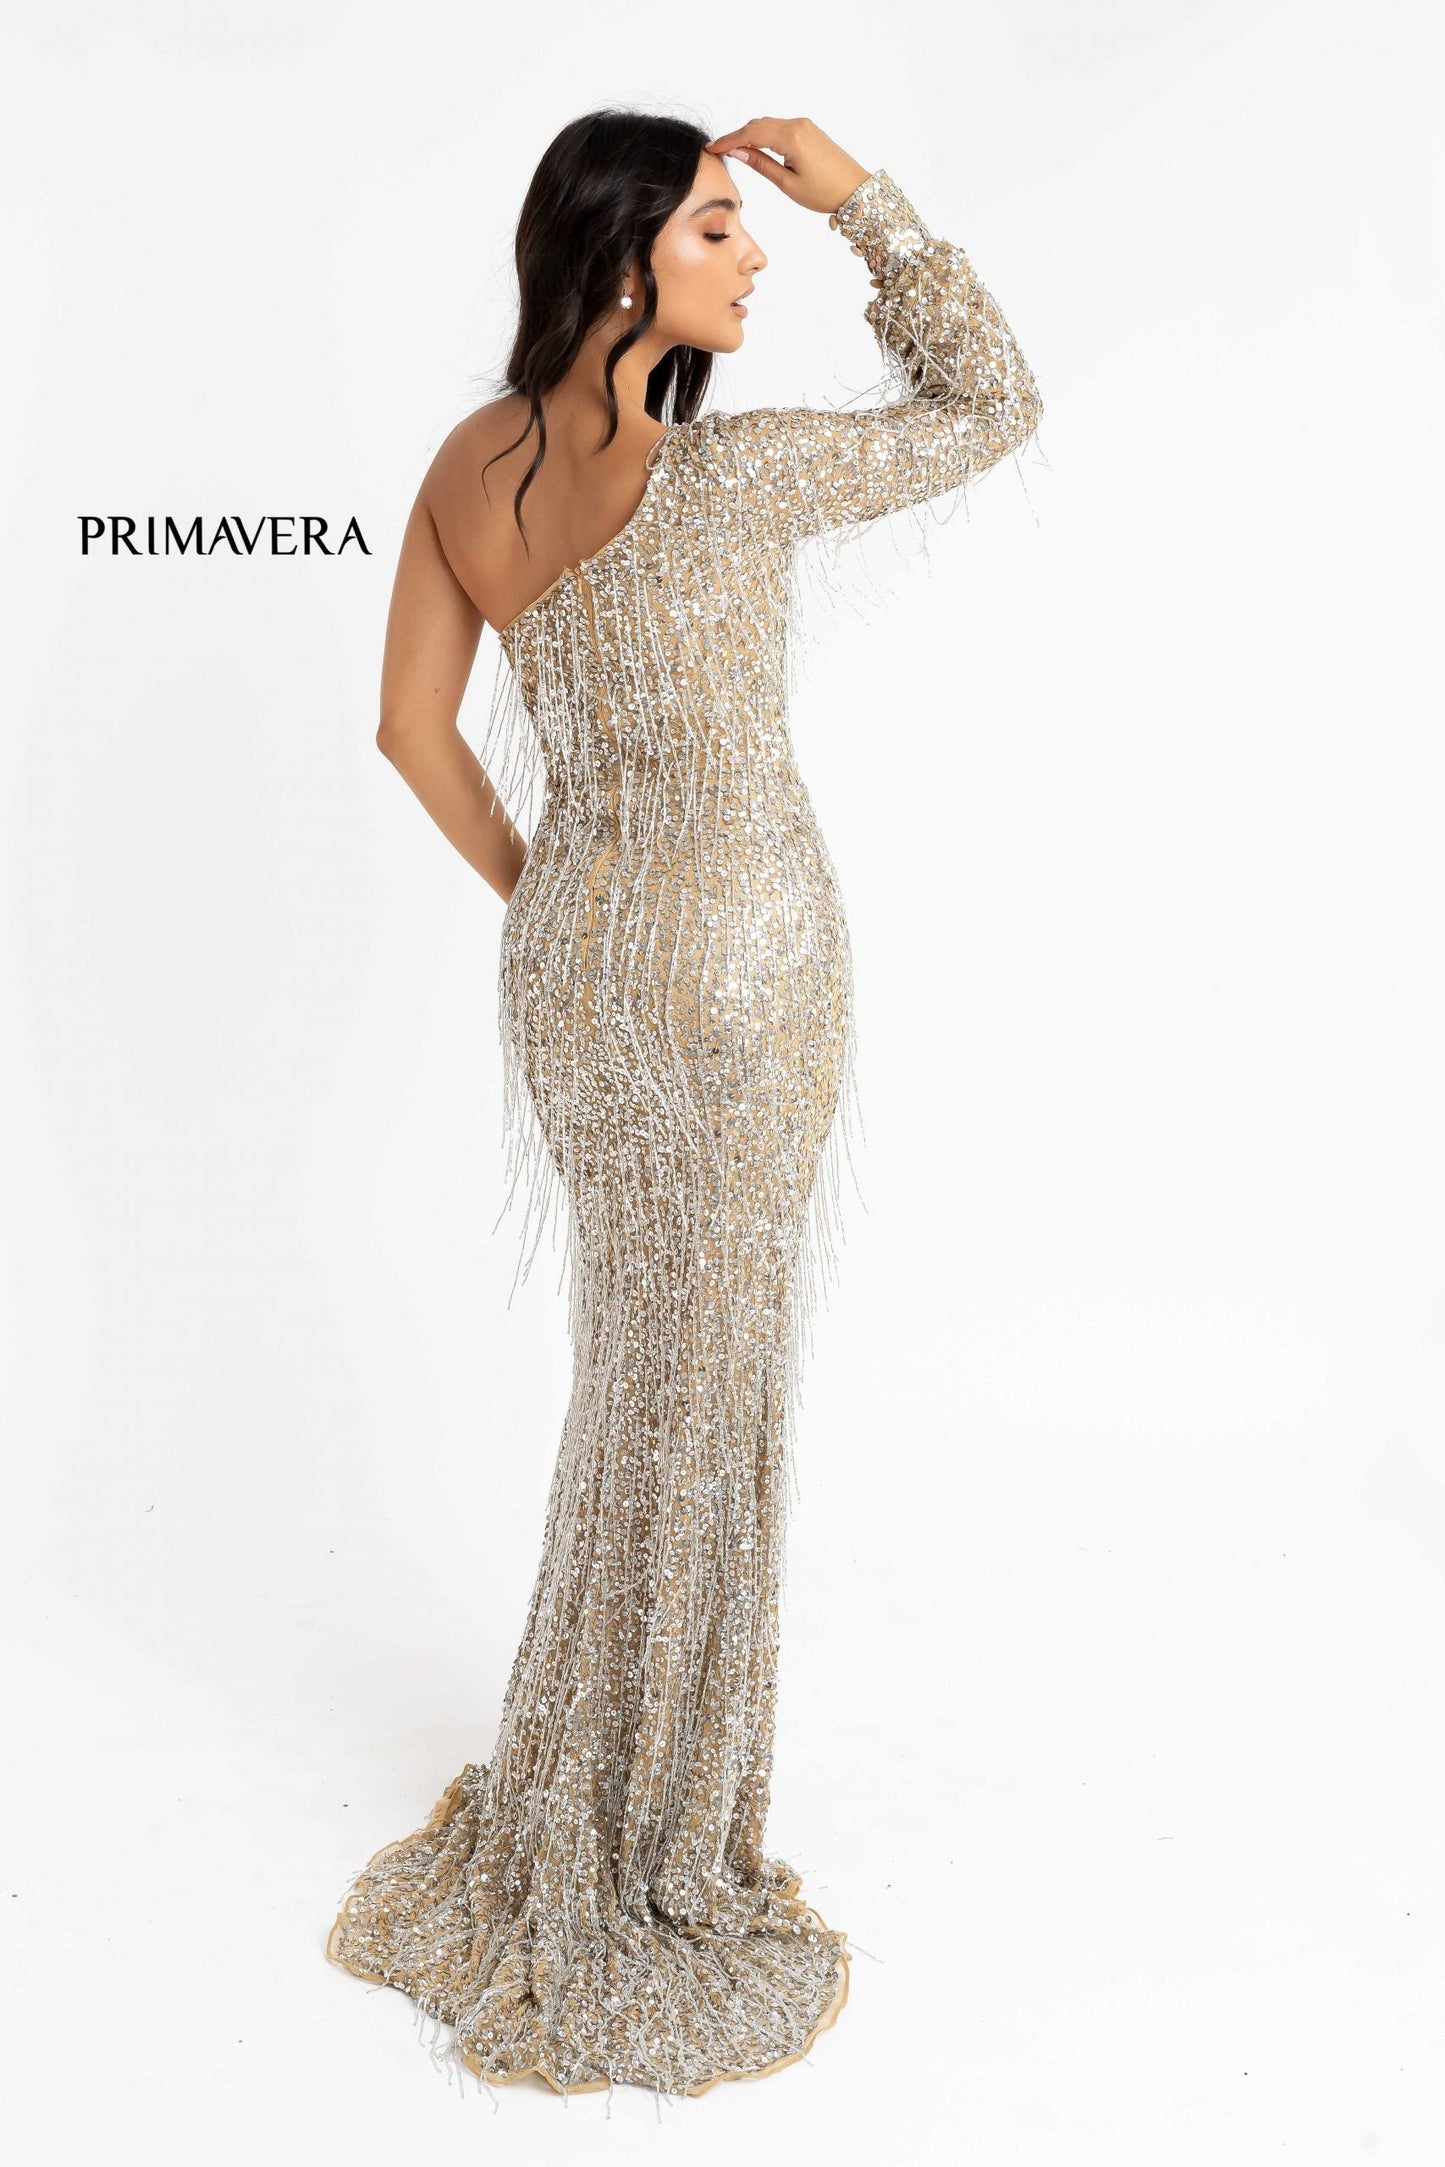 Primavera Couture 3739 Cuffed Sleeve Fringe Evening Prom Dress One Shoulder with Slit size 6 Powder Blue